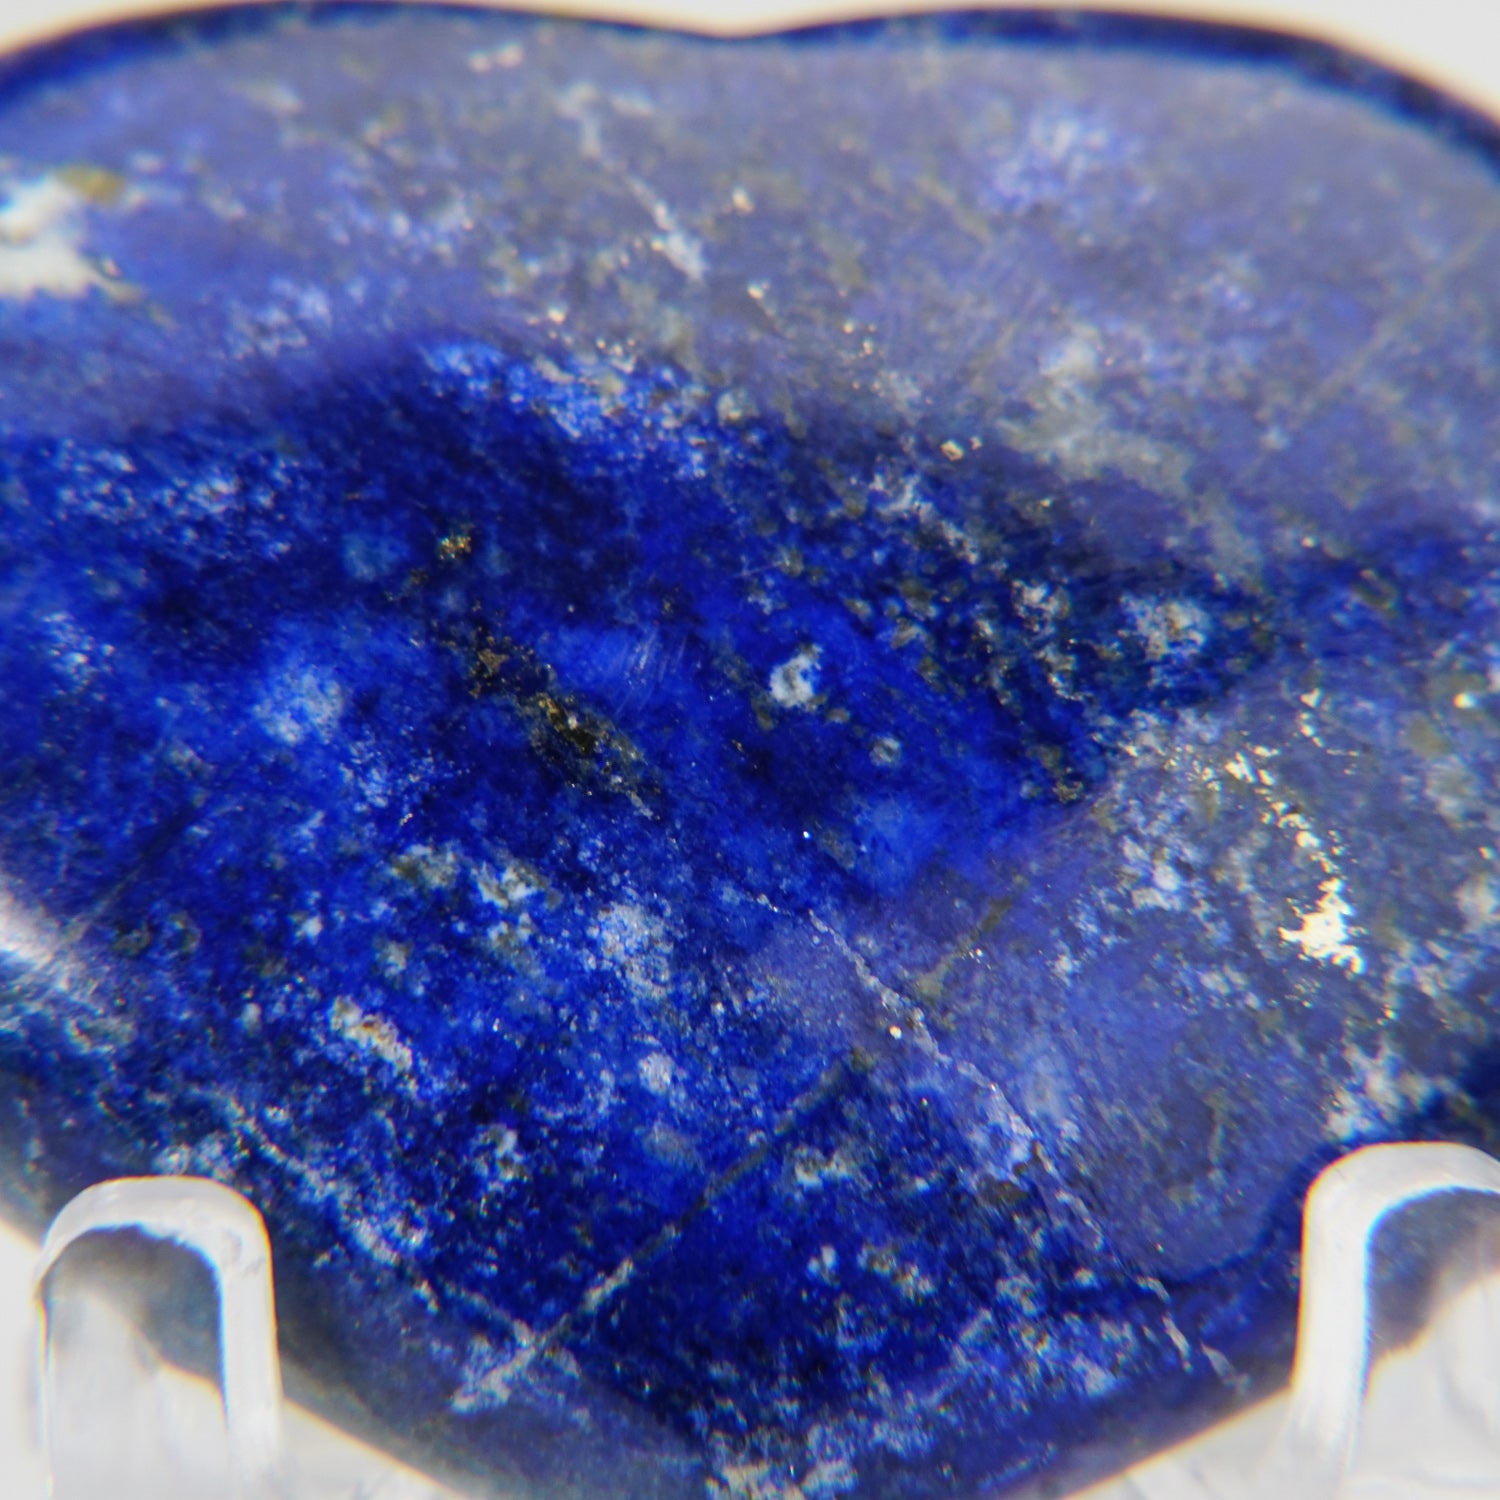 Polished Lapis Lazuli Heart from Afghanistan (33.9 grams)